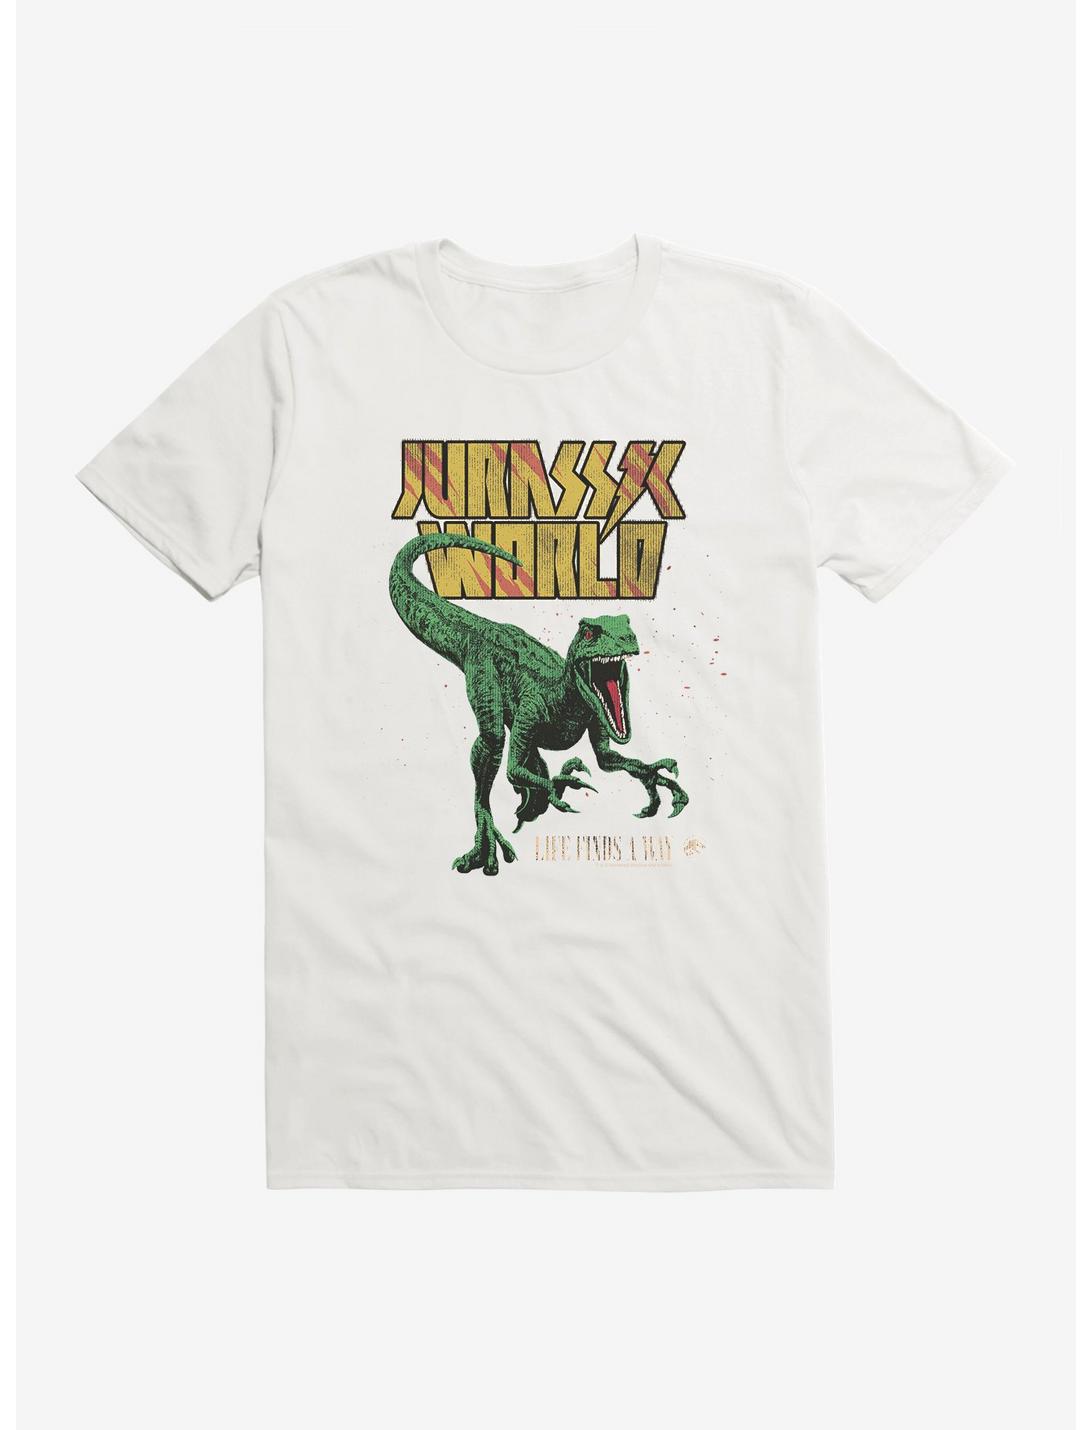 Jurassic Park Life Finds A Way T-Shirt, WHITE, hi-res